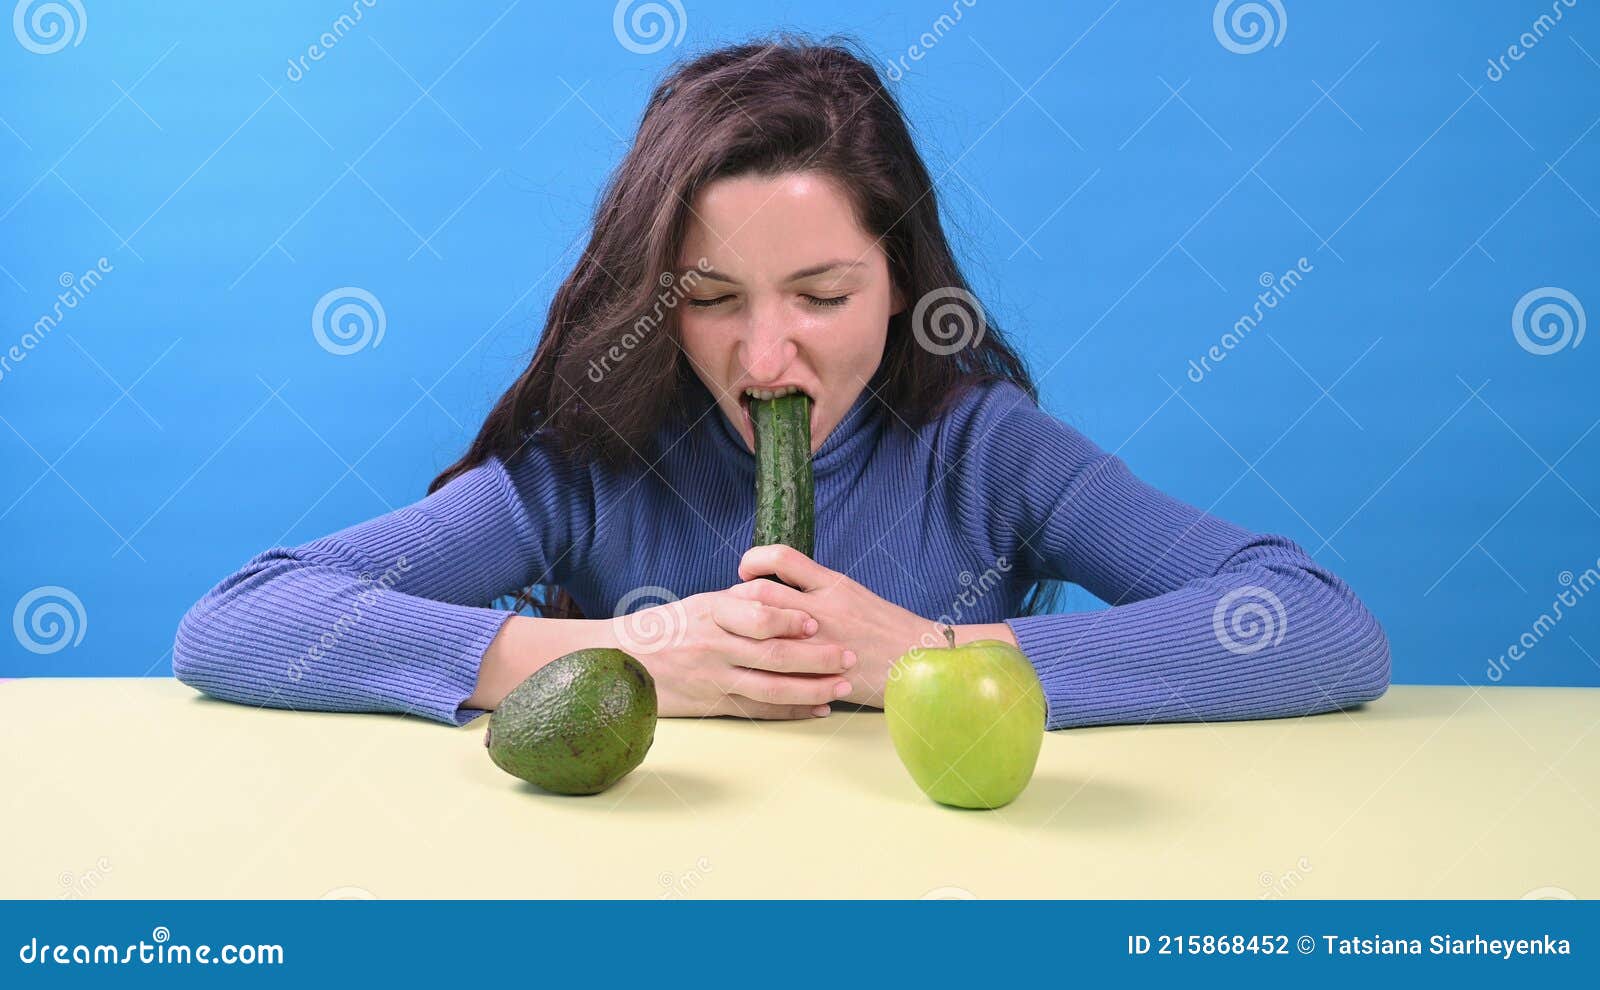 Young Happy Woman Eating Big Cucumber on Blue Background image